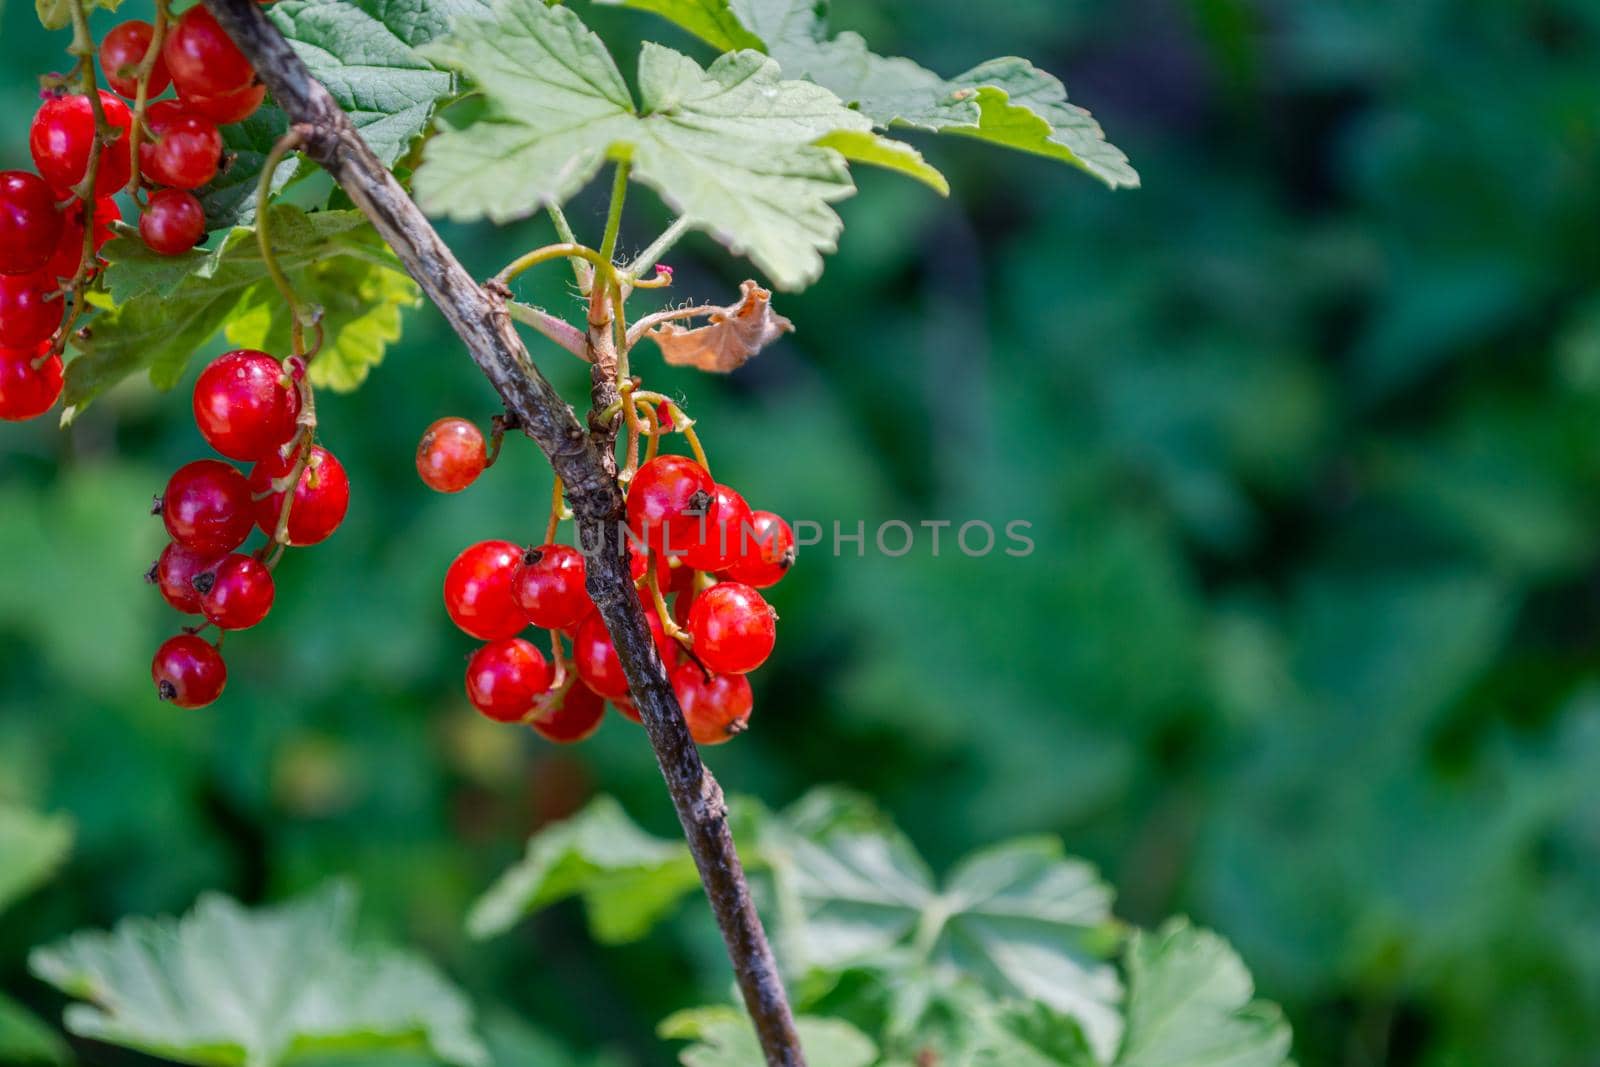 Red currant berries on a branch of a bush on a green background of leaves.